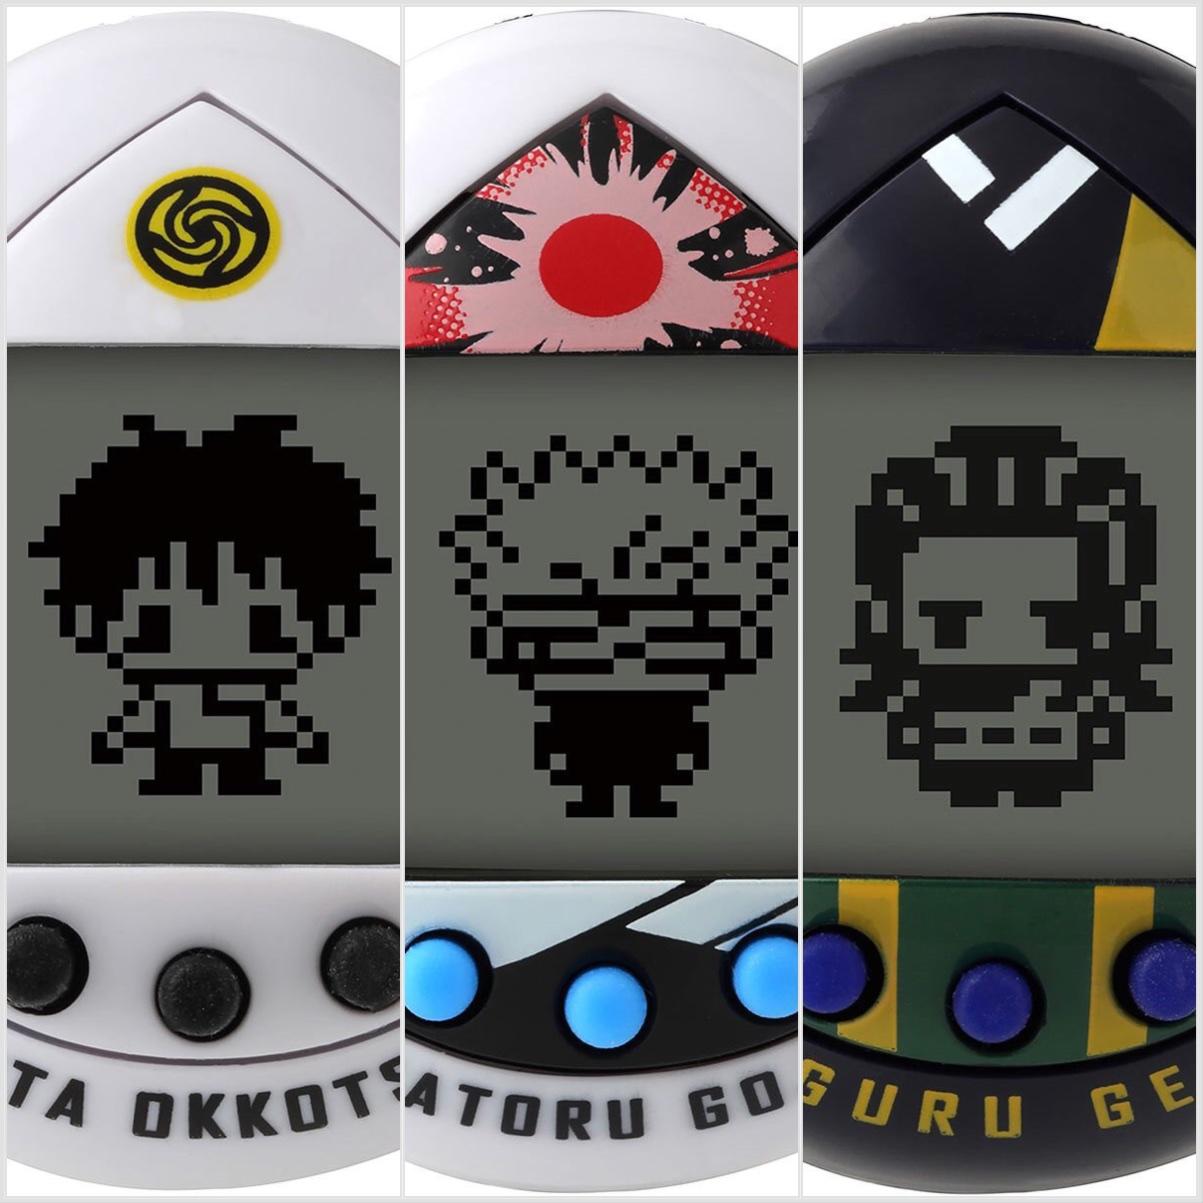 Jujutsu Kaisen 0 Tamagotchi Are Now Available In The U.S.